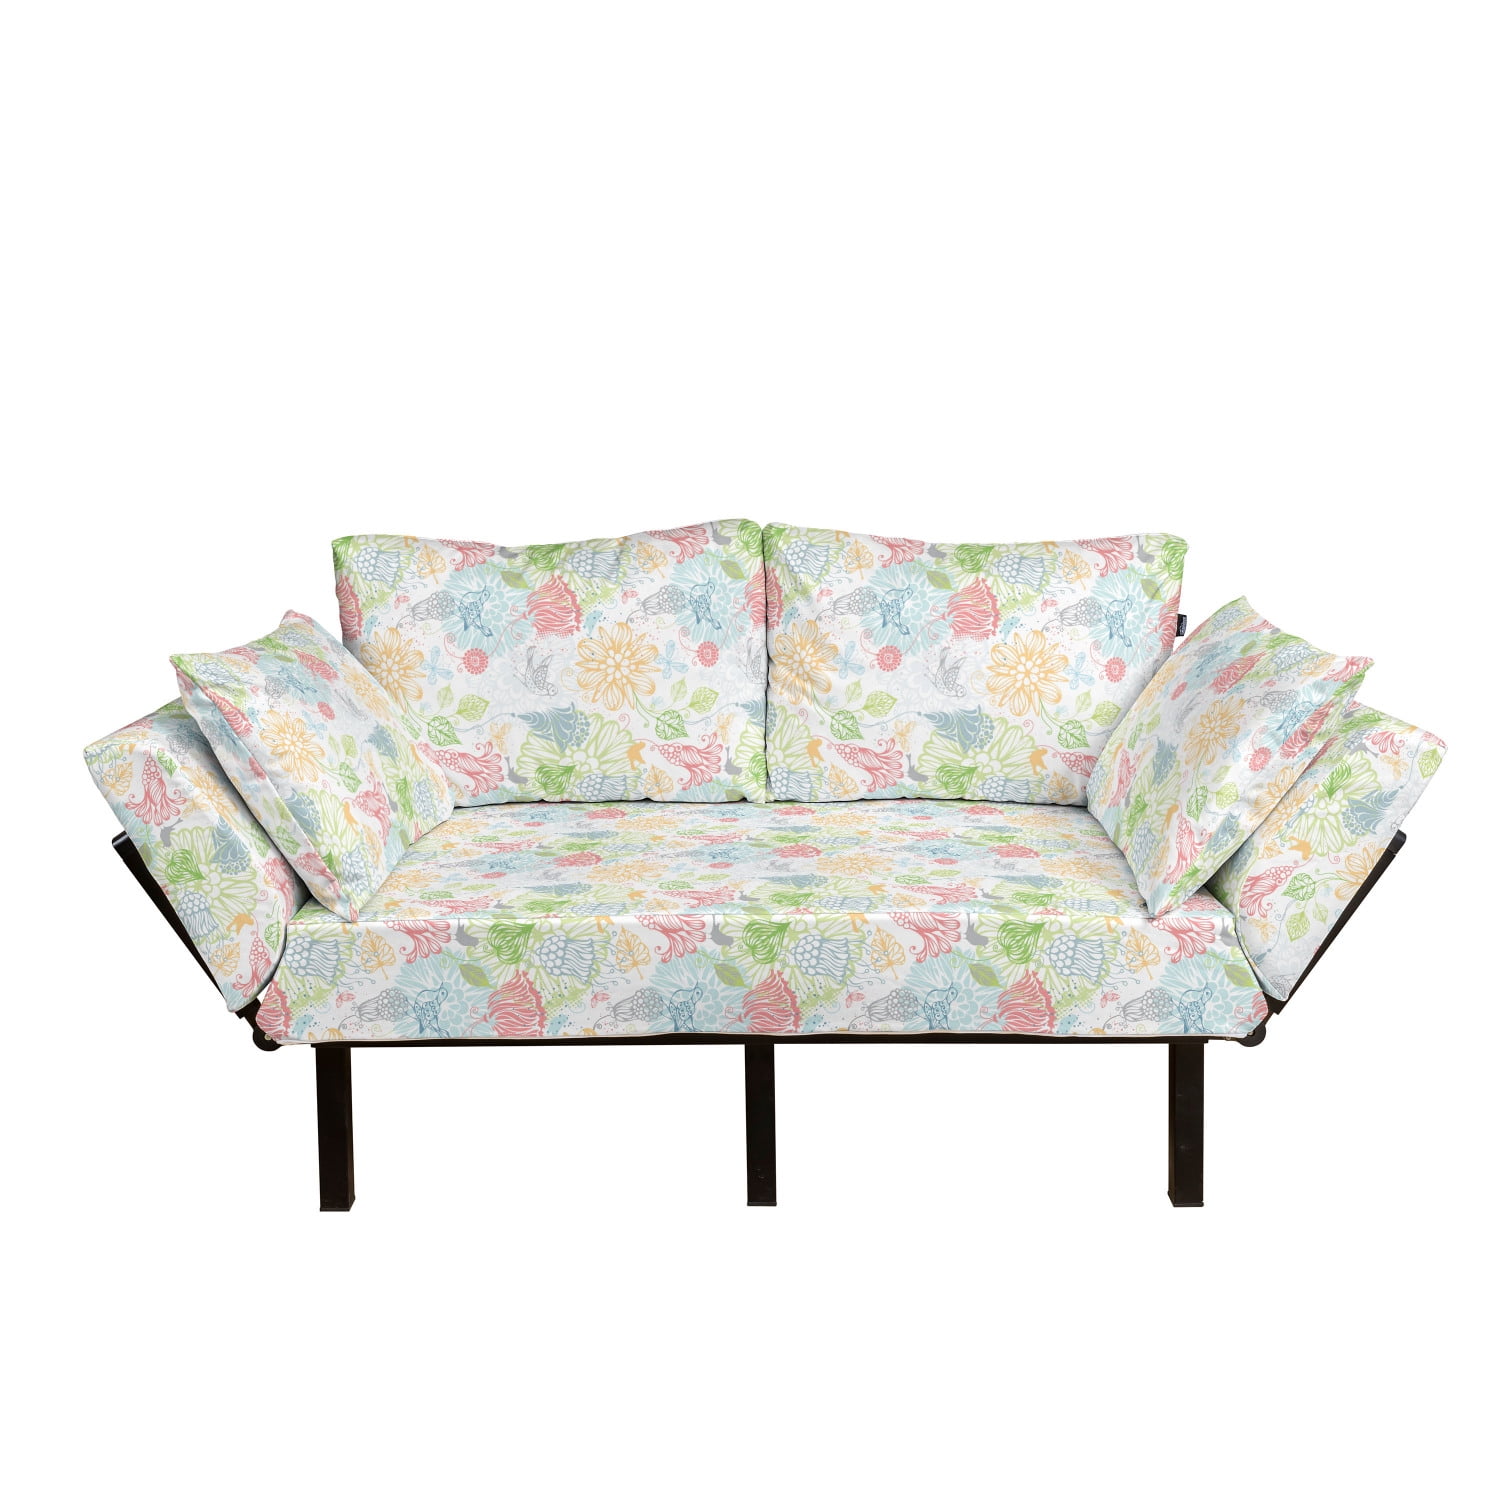 Daybed with Metal Frame Upholstered Sofa for Living Dorm Ambesonne Pink Futon Couch Blush Multicolor Loveseat Soft Pastel Colored Spring Peony Blossoms Flowers Berry Twigs Art Illustration